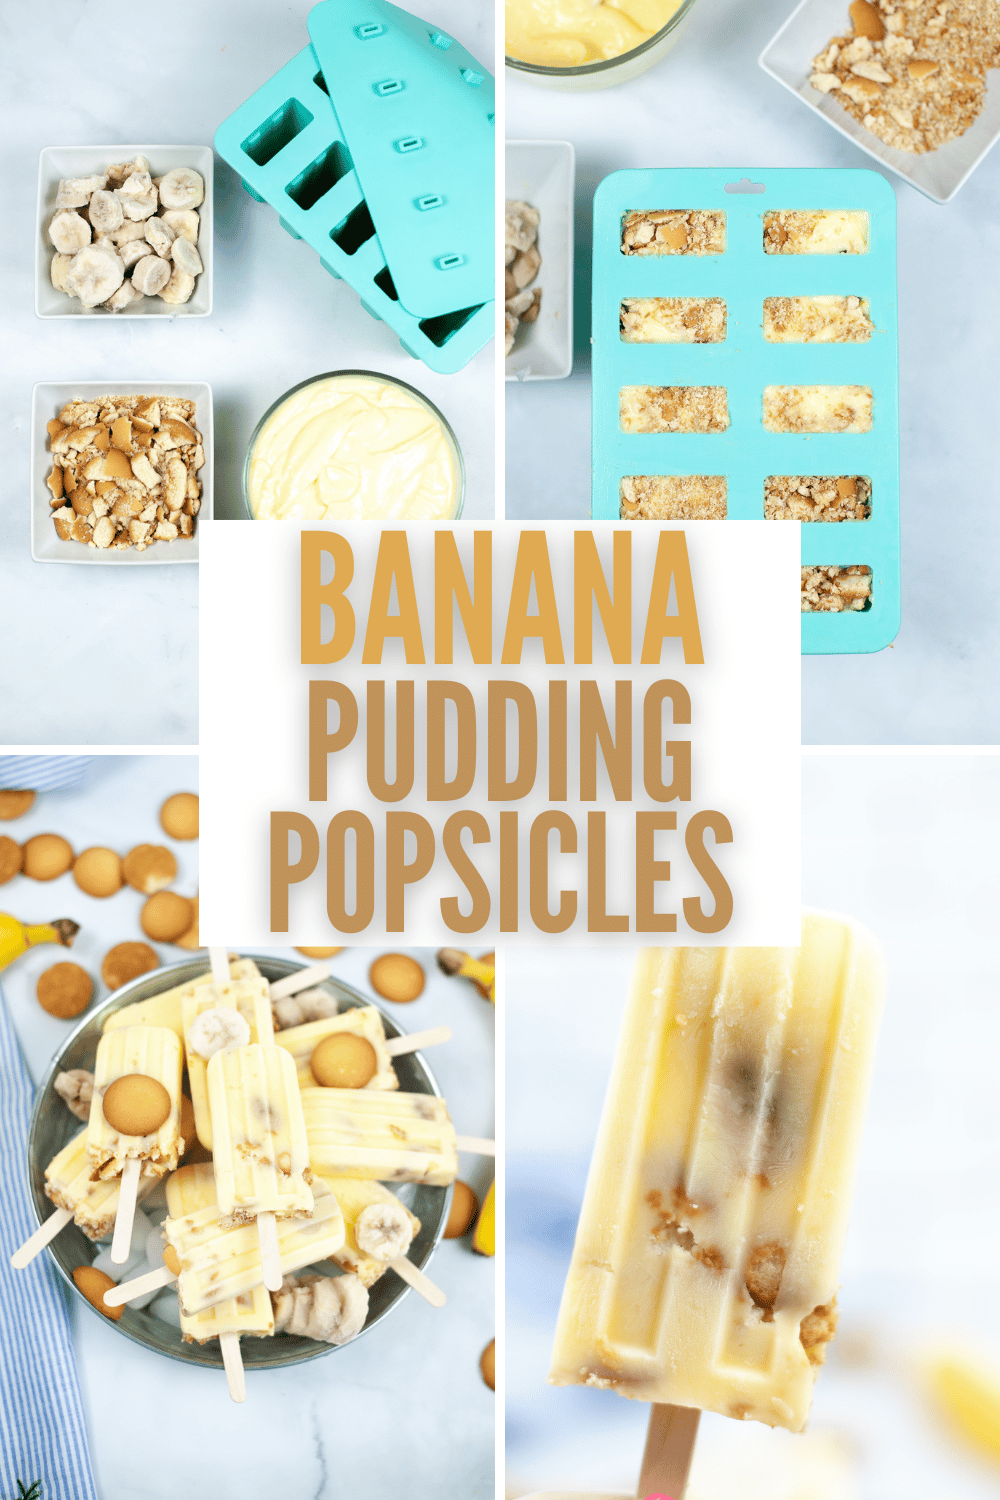 These Banana Pudding Popsicles are my new favorite summer dessert! They are so easy to make, and they taste just like banana pudding. #bananapuddingpopsicles #bananapudding #popsicles #summerdessert via @wondermomwannab